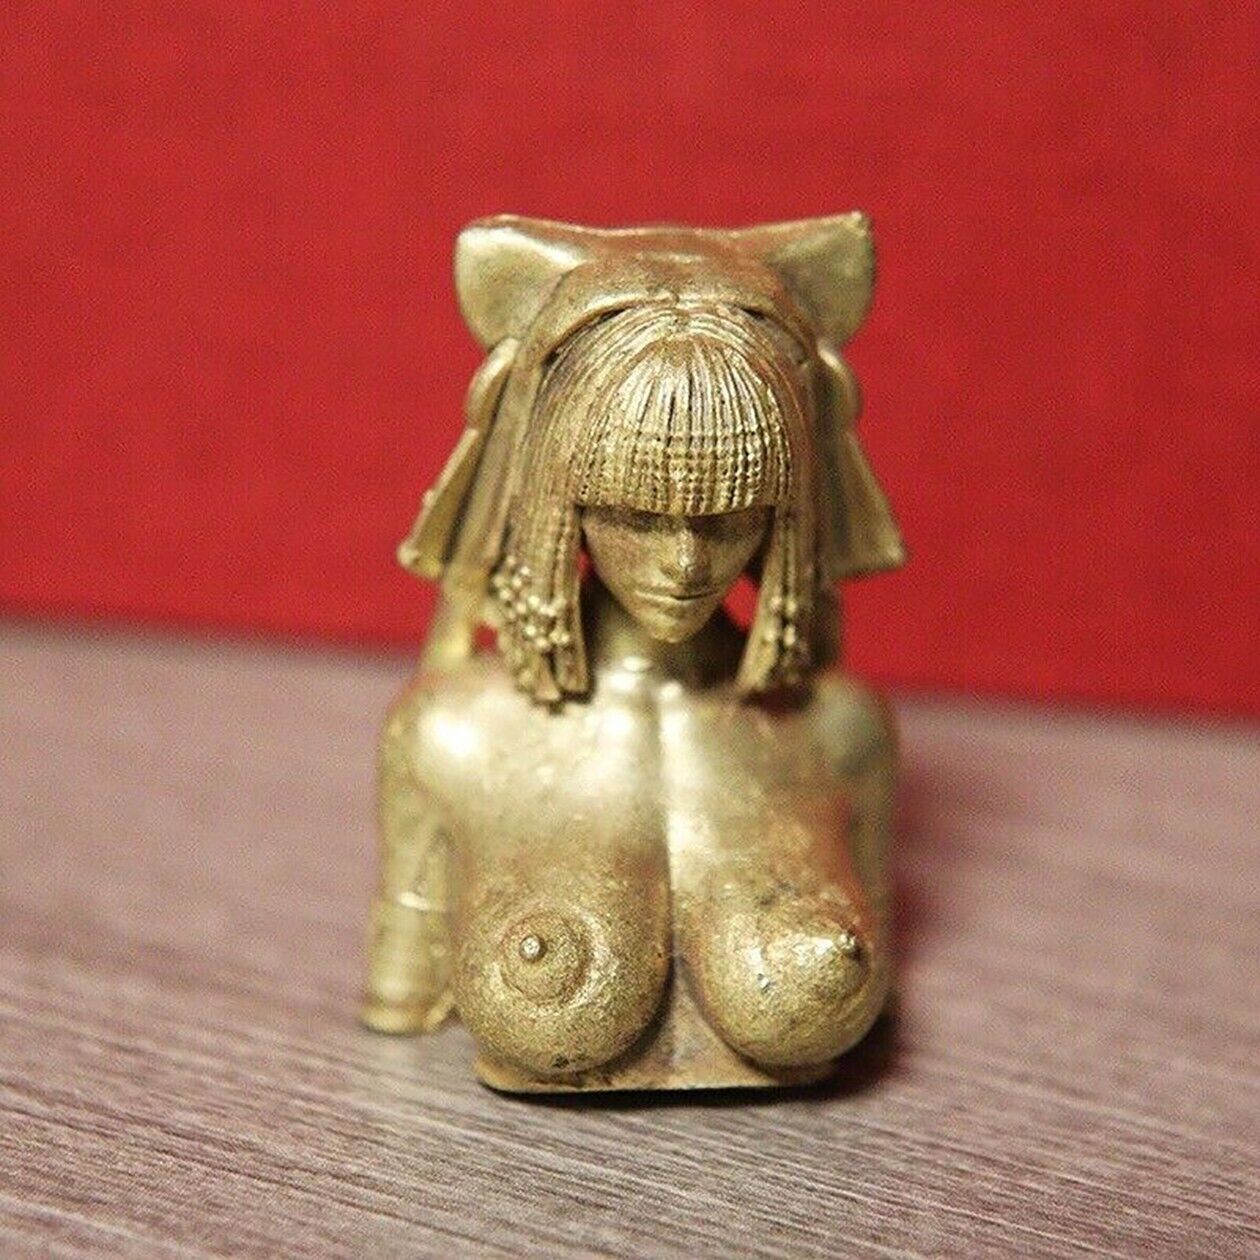 Solid Brass Egyptian Queen Statue Miniature Version of Body Art Decoration New